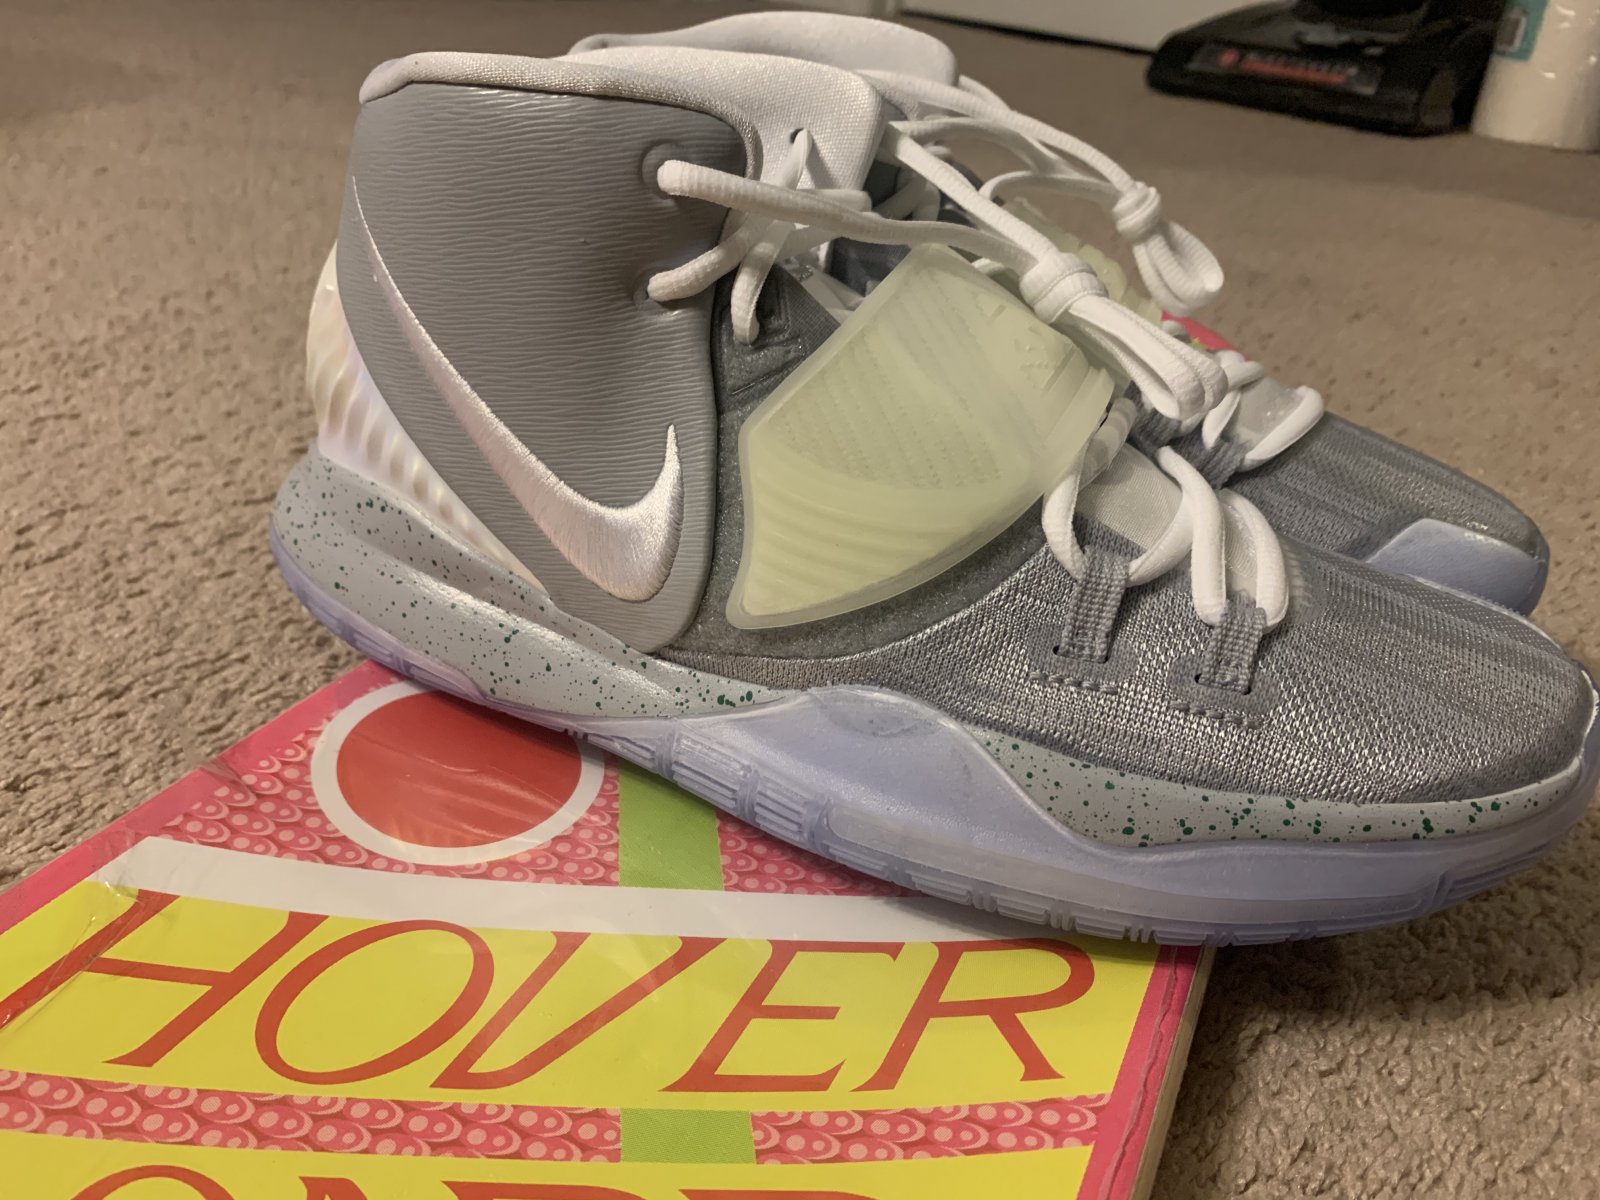 Nike iD By You Kyrie 6 McFly Mag